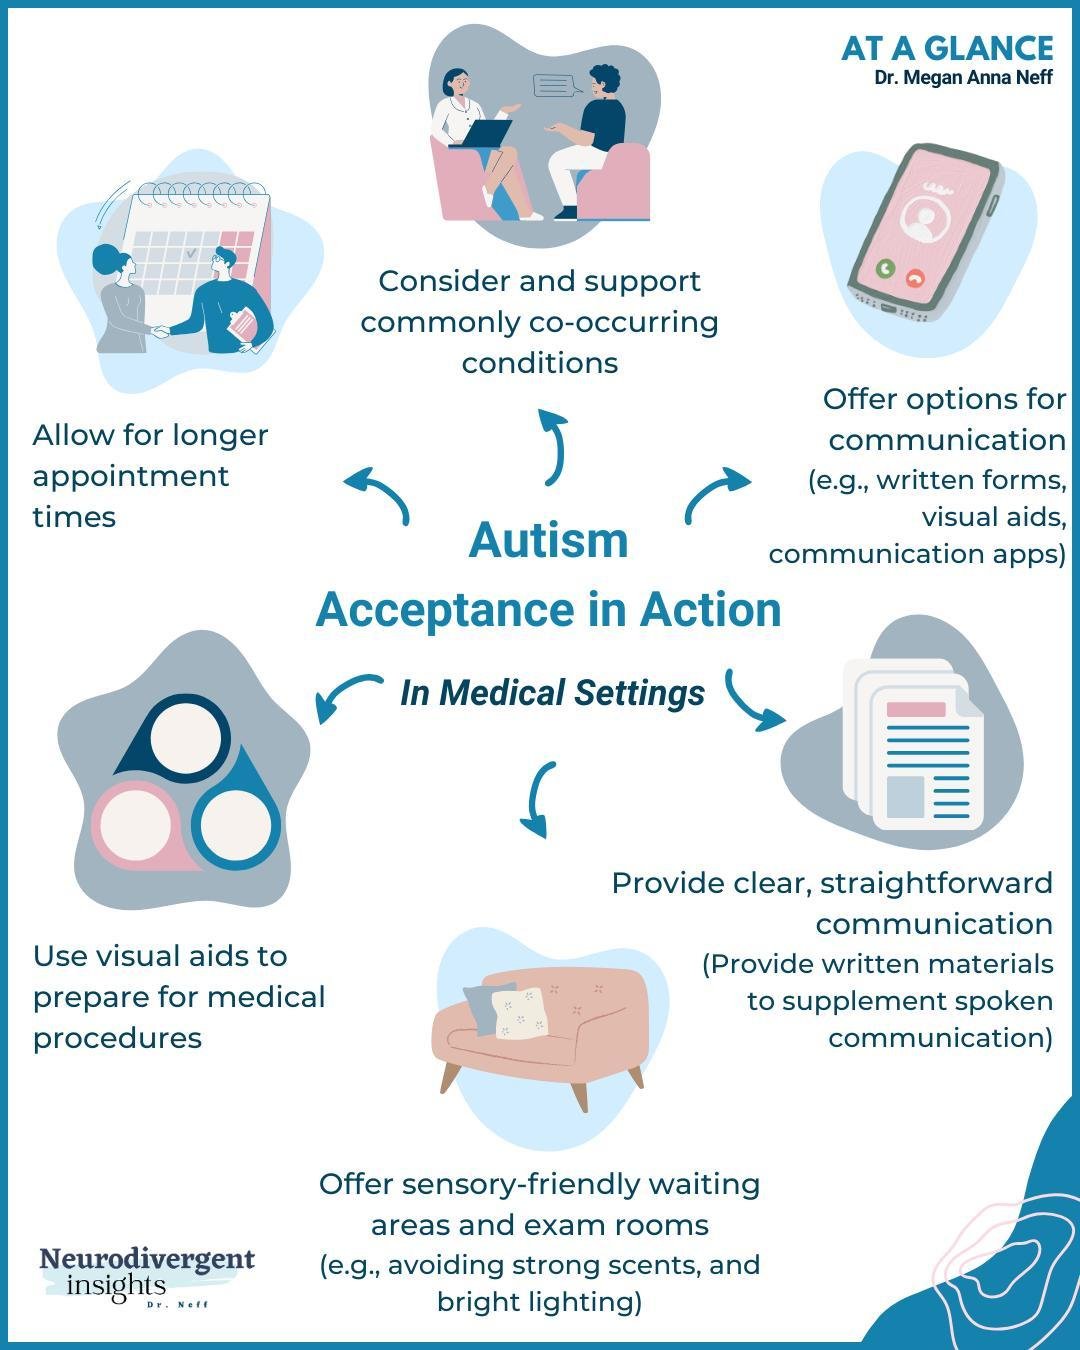 #ConcreteAcceptance: Day 6 of 7 - Autism Inclusion in Medical Settings⁠
⁠
Medical environments can be challenging for Autistic people--we also happen to have a lot of medical conditions! ⁠
⁠
Today's infographic outlines steps to make these spaces mor